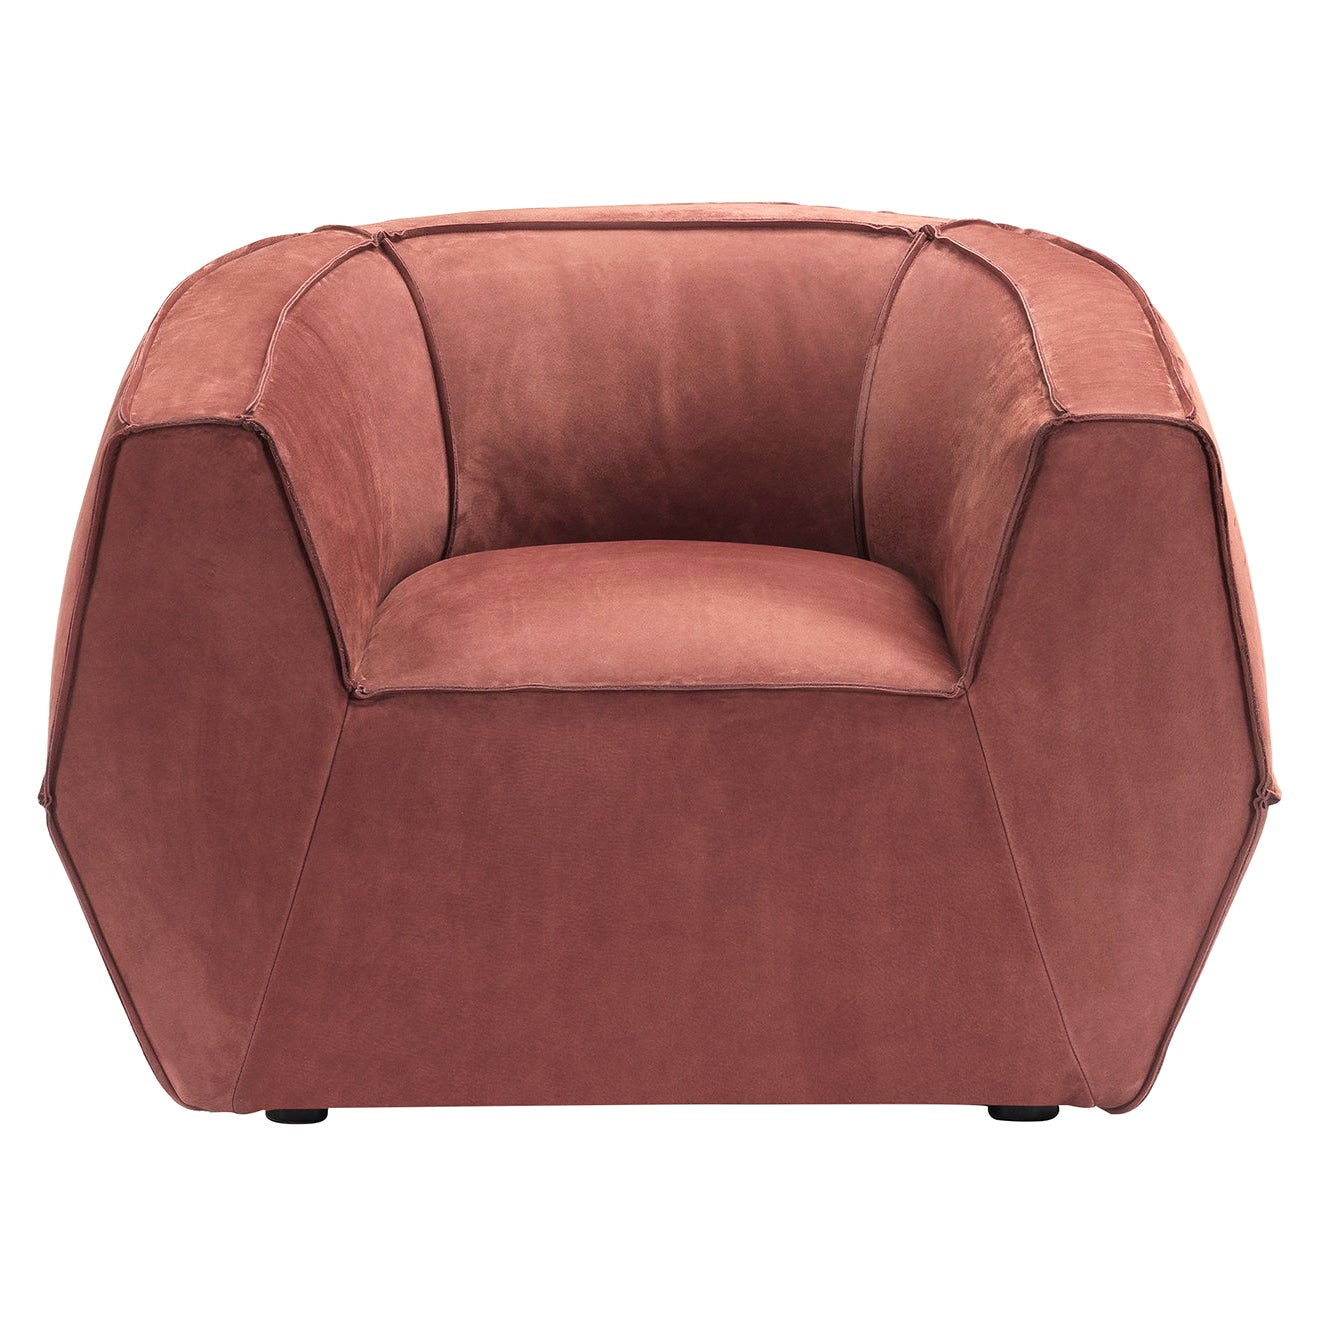 Infinito Red Armchair by Lorenza Bozzoli For Sale